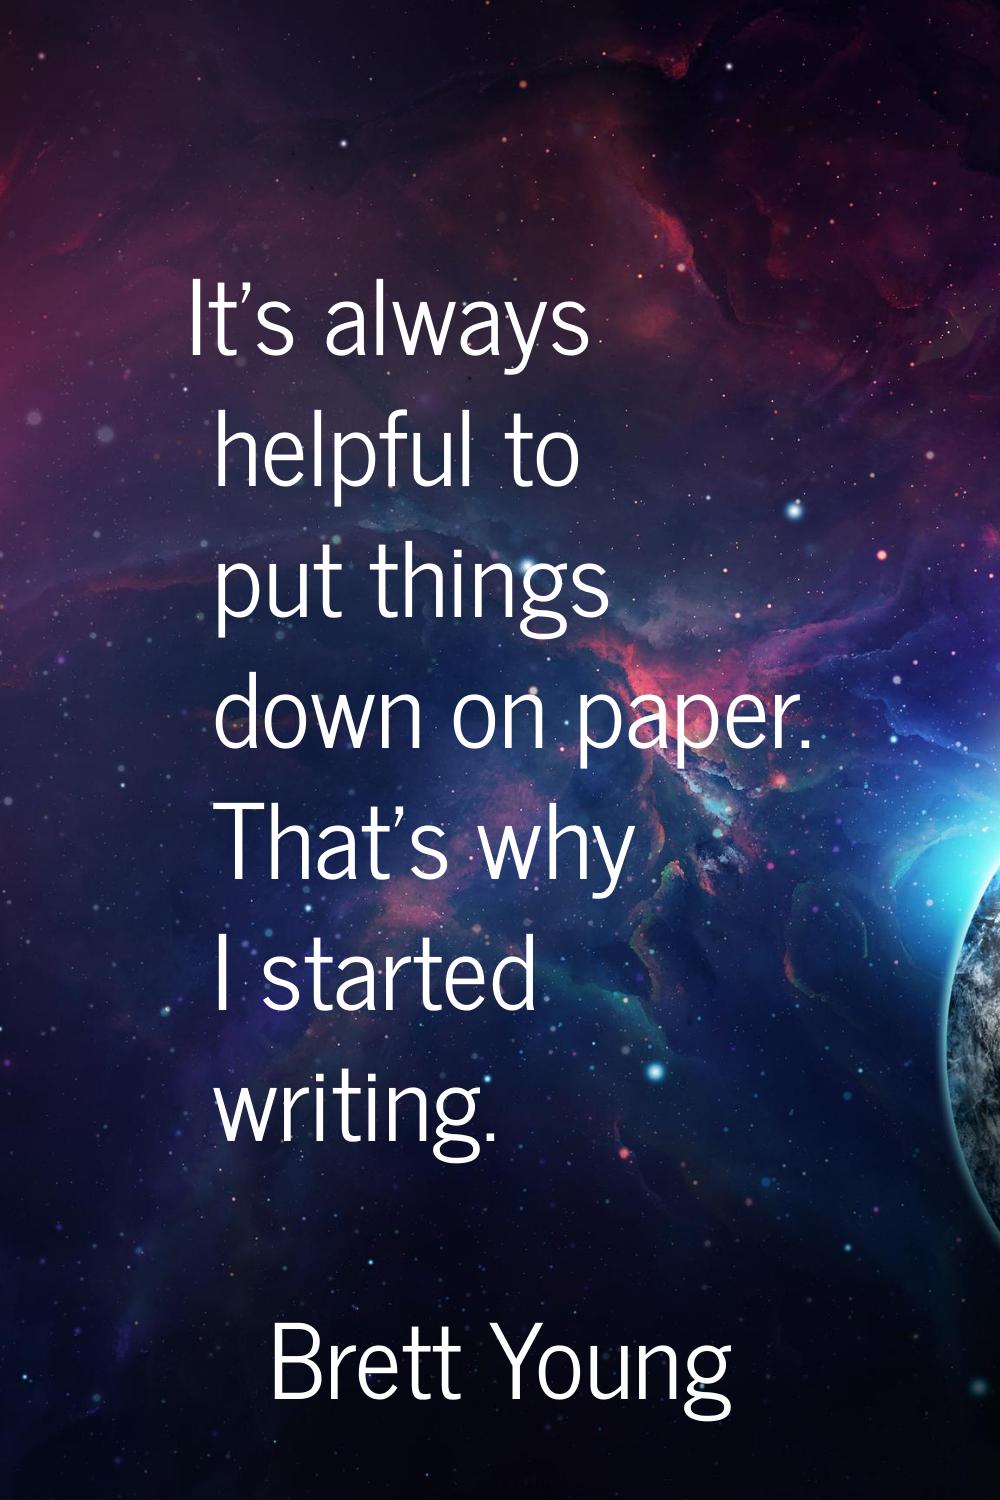 It's always helpful to put things down on paper. That's why I started writing.